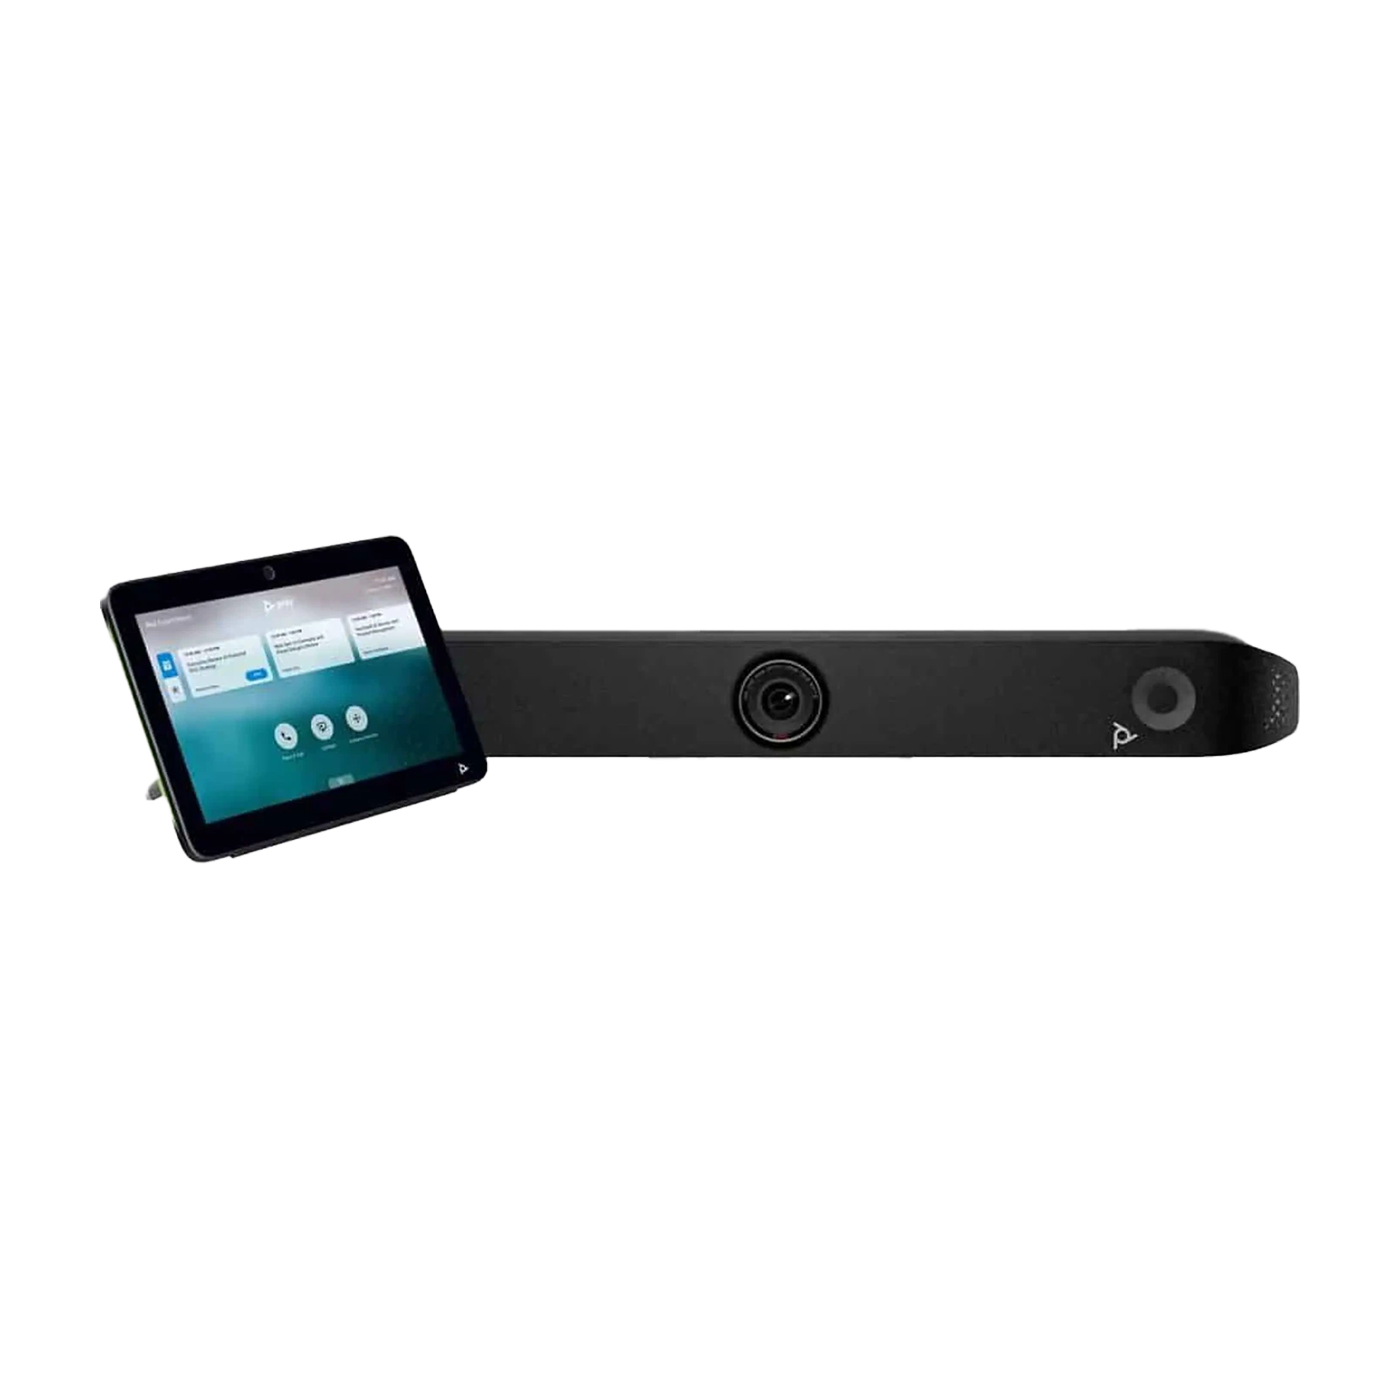 Poly Studio X52 Video Bar with TC10 Touch Control